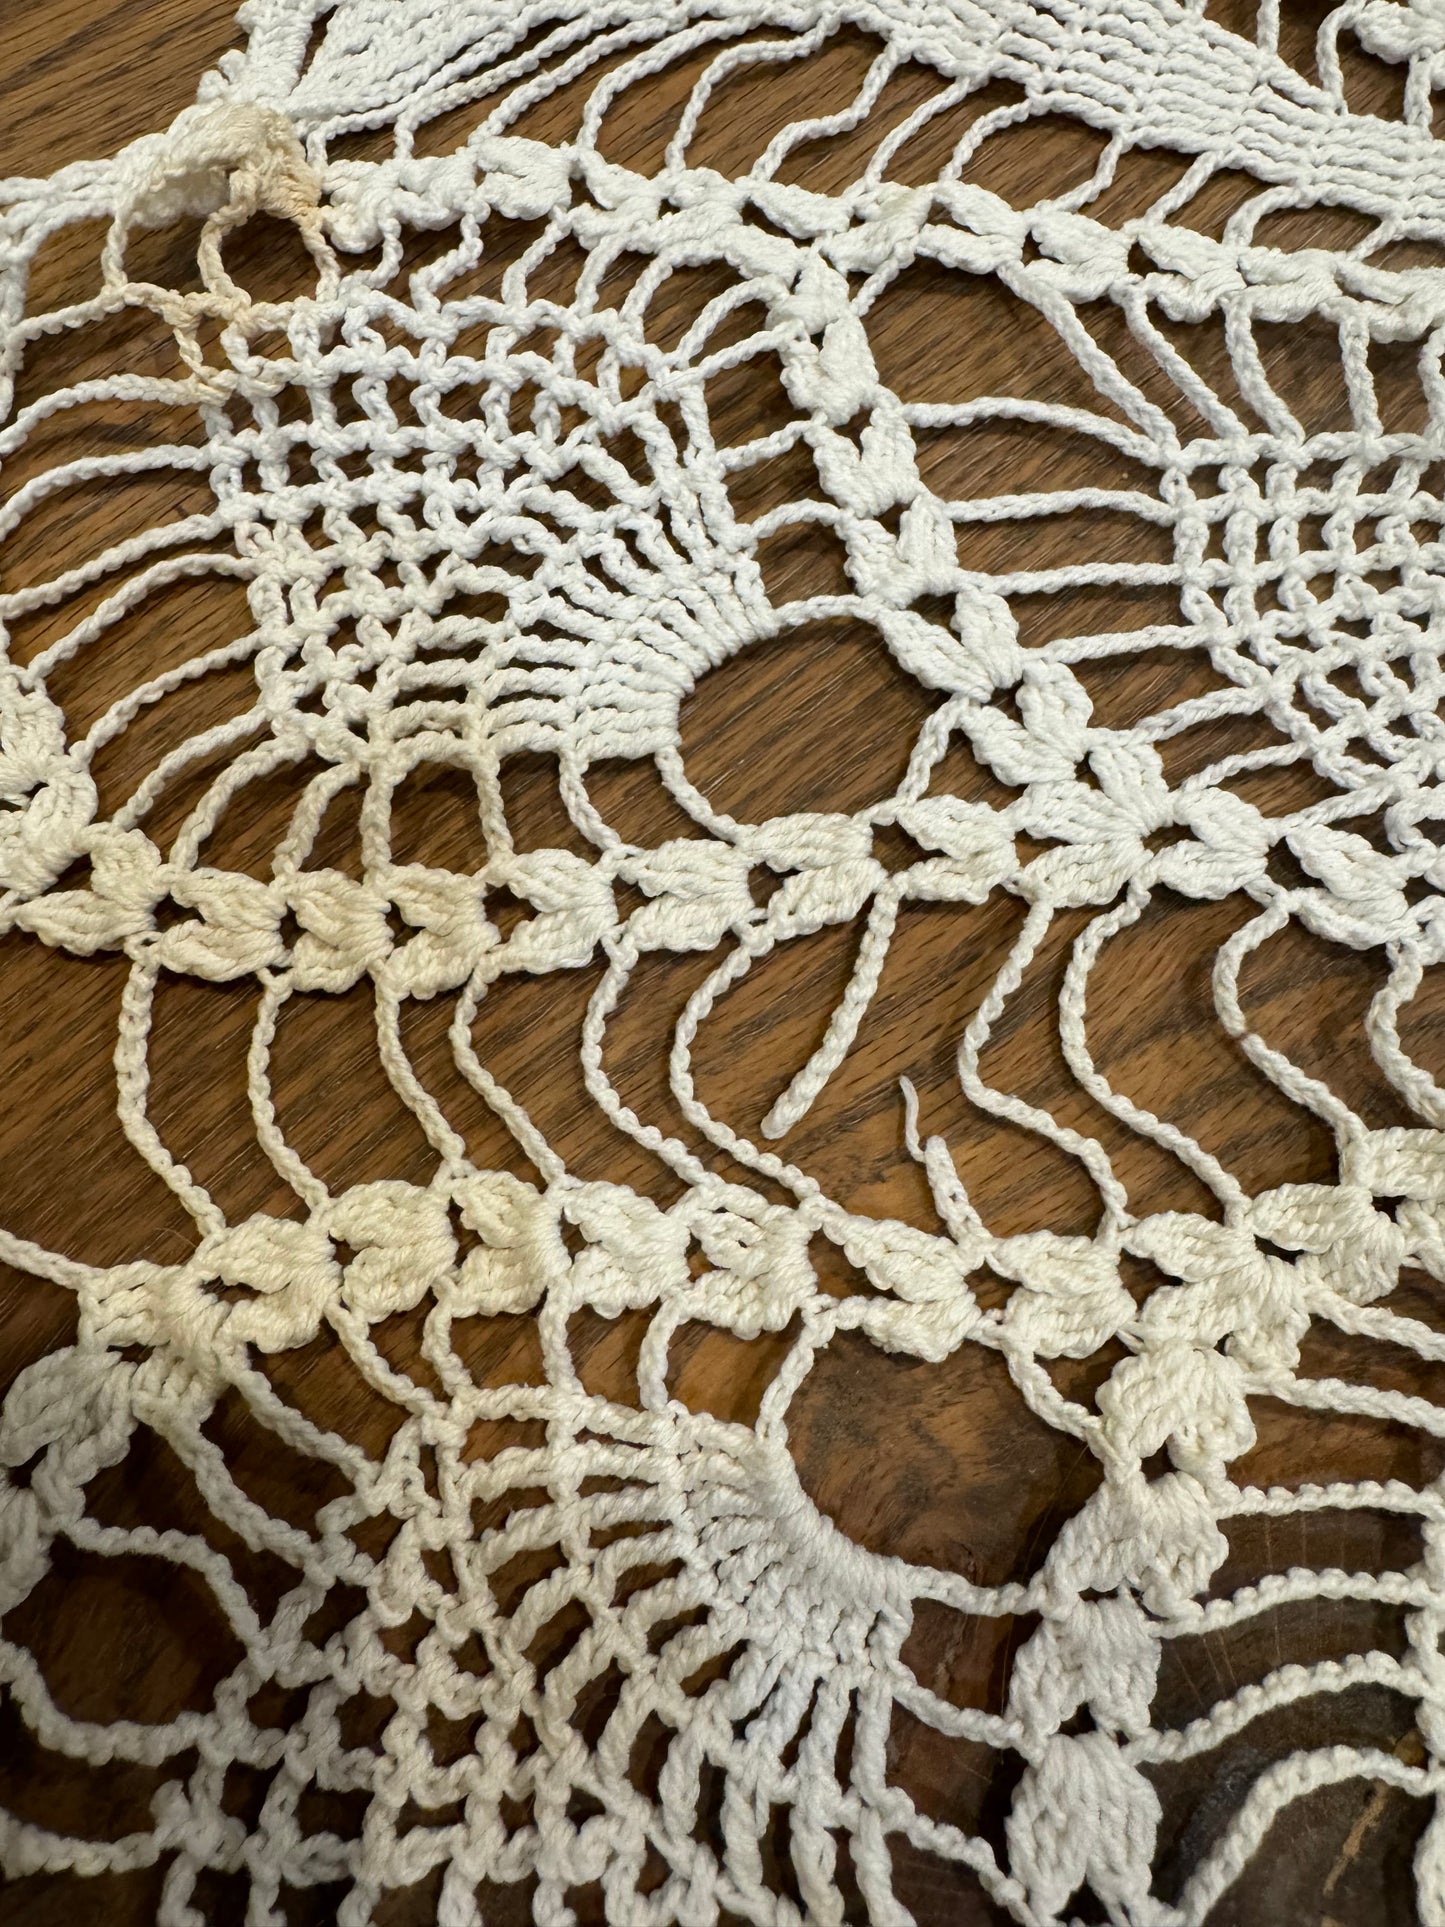 Crochet Doily -has stain and small tear as is